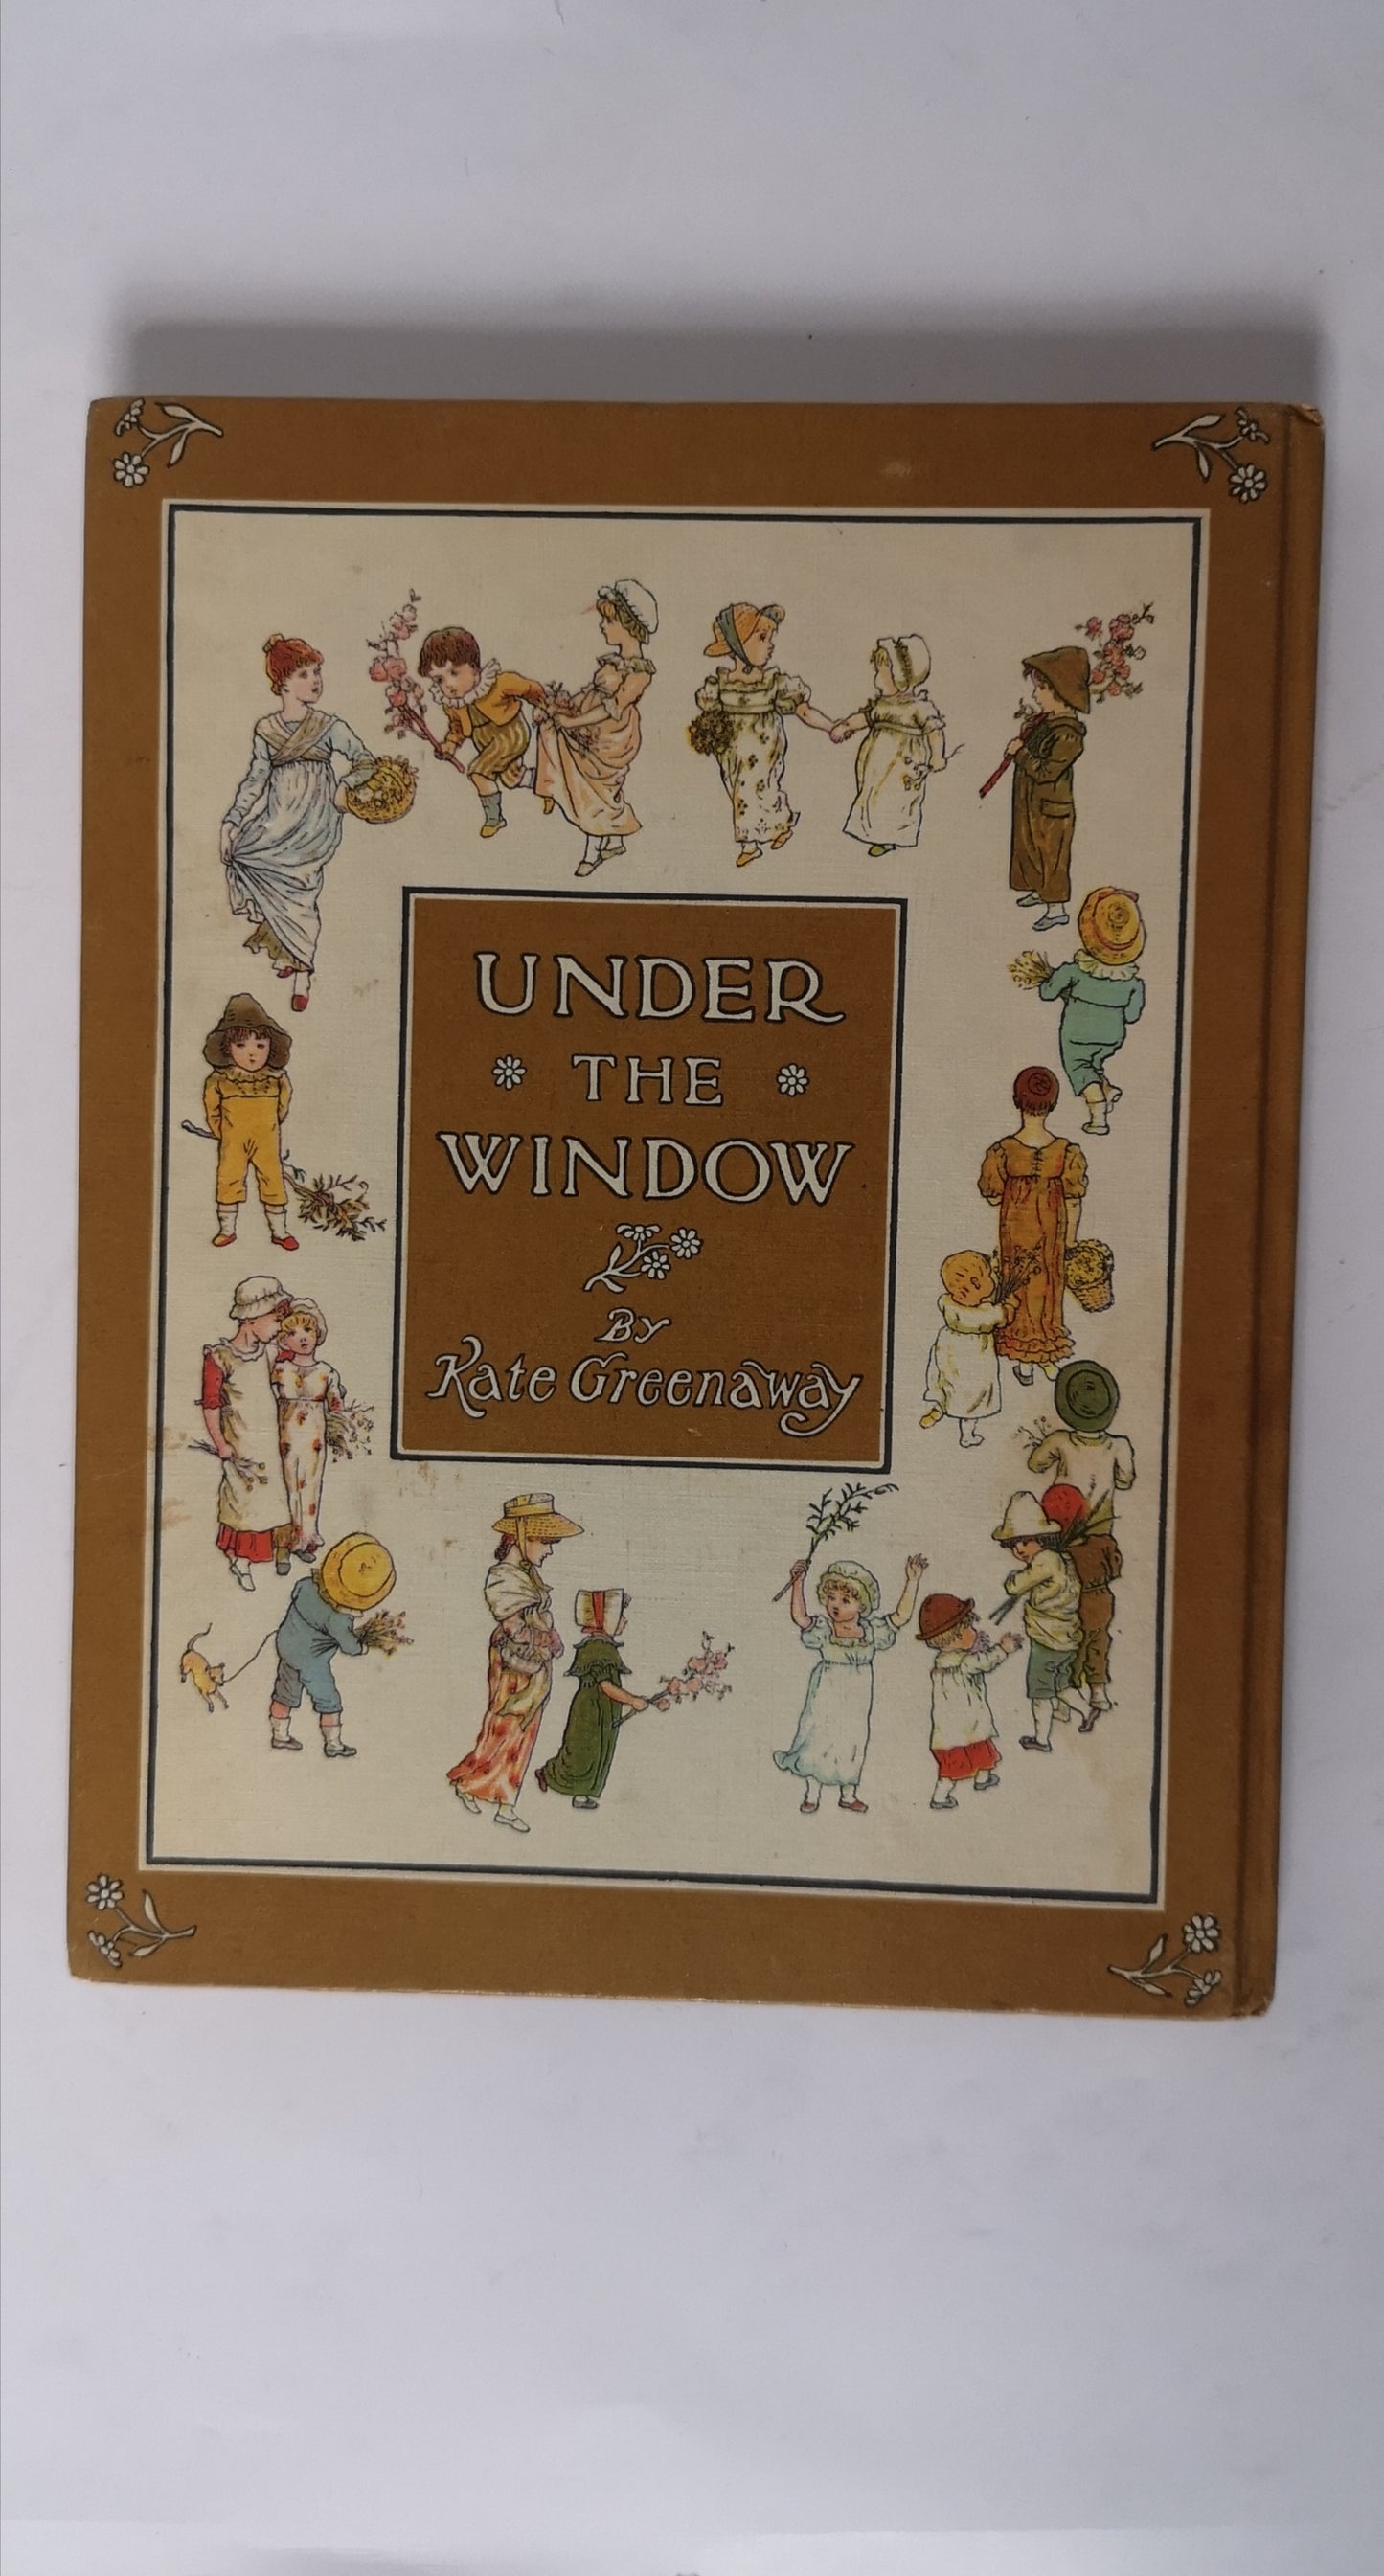 Under The Window by Kate Greenaway